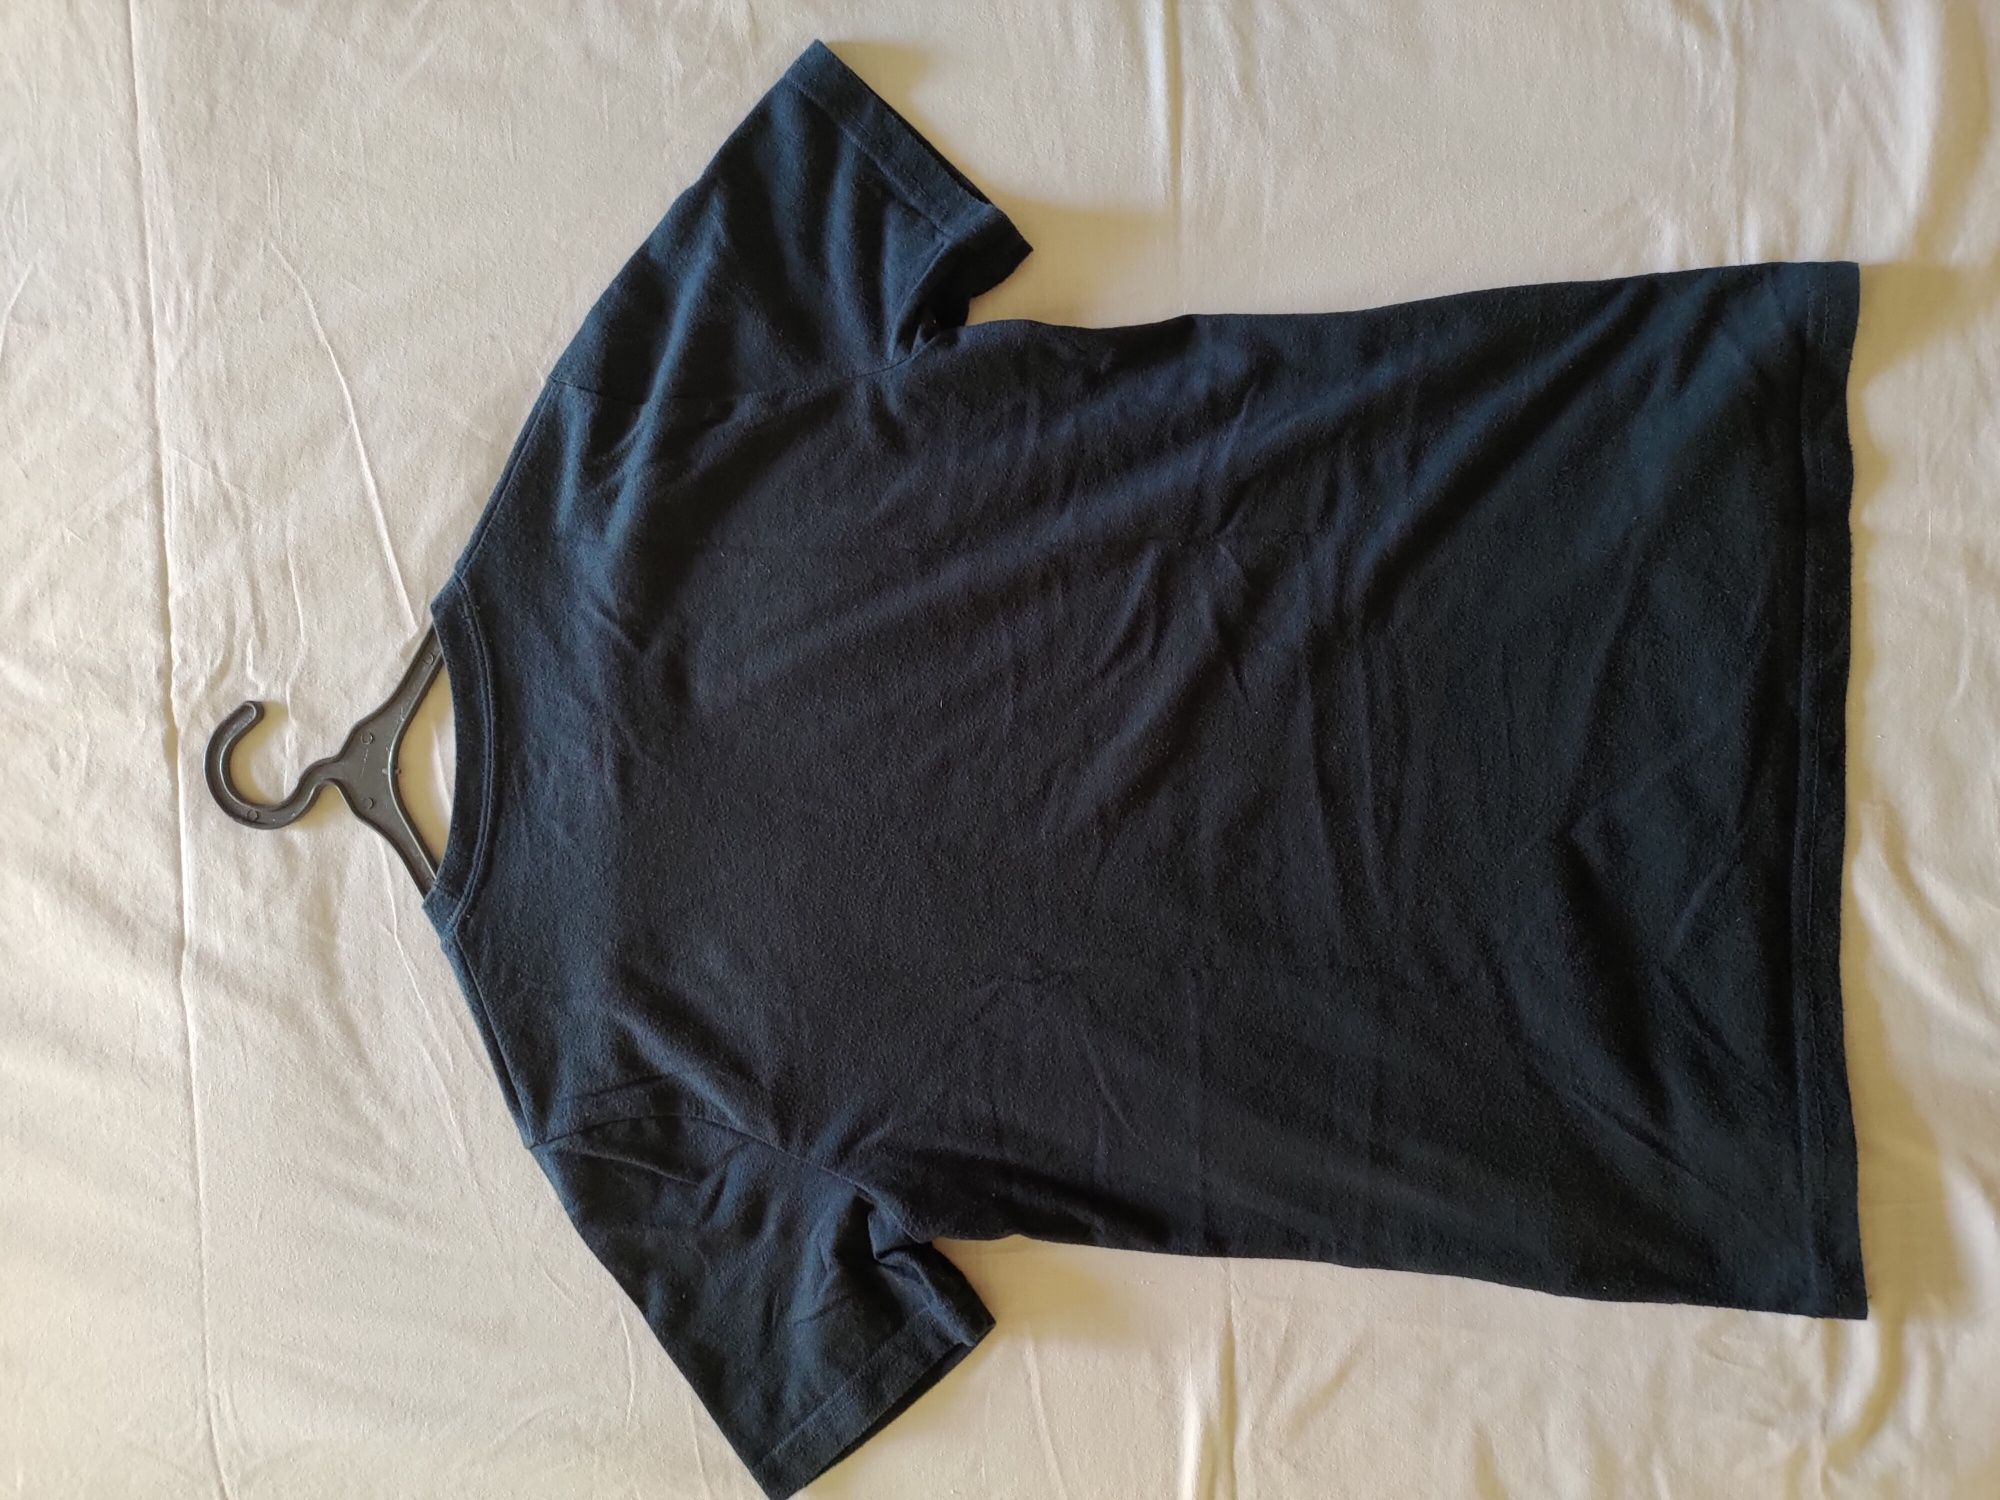 T-shirt Abercrombie & Fitch Azul escura